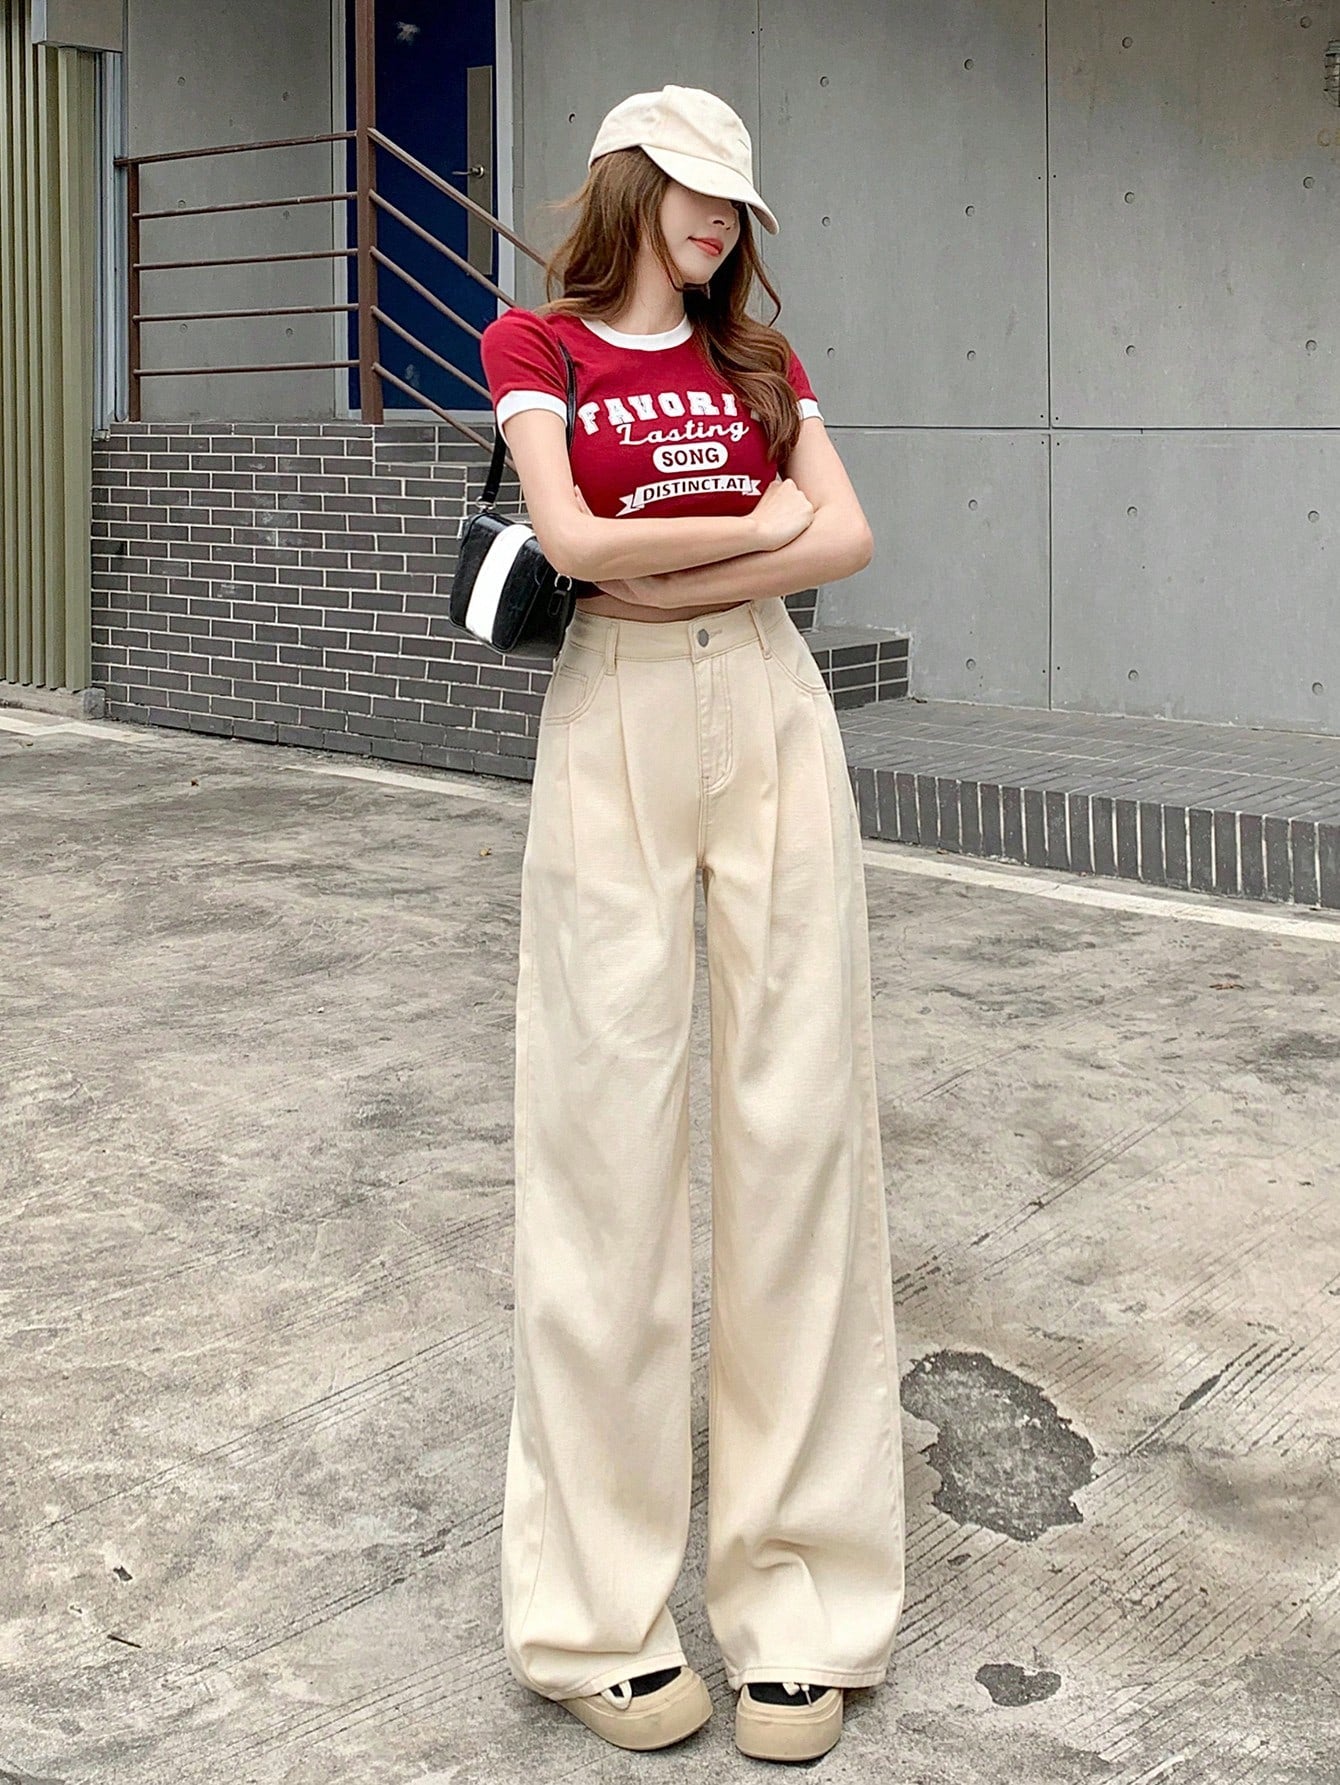 Women's Solid Color Casual Pleated Wide Leg Jeans